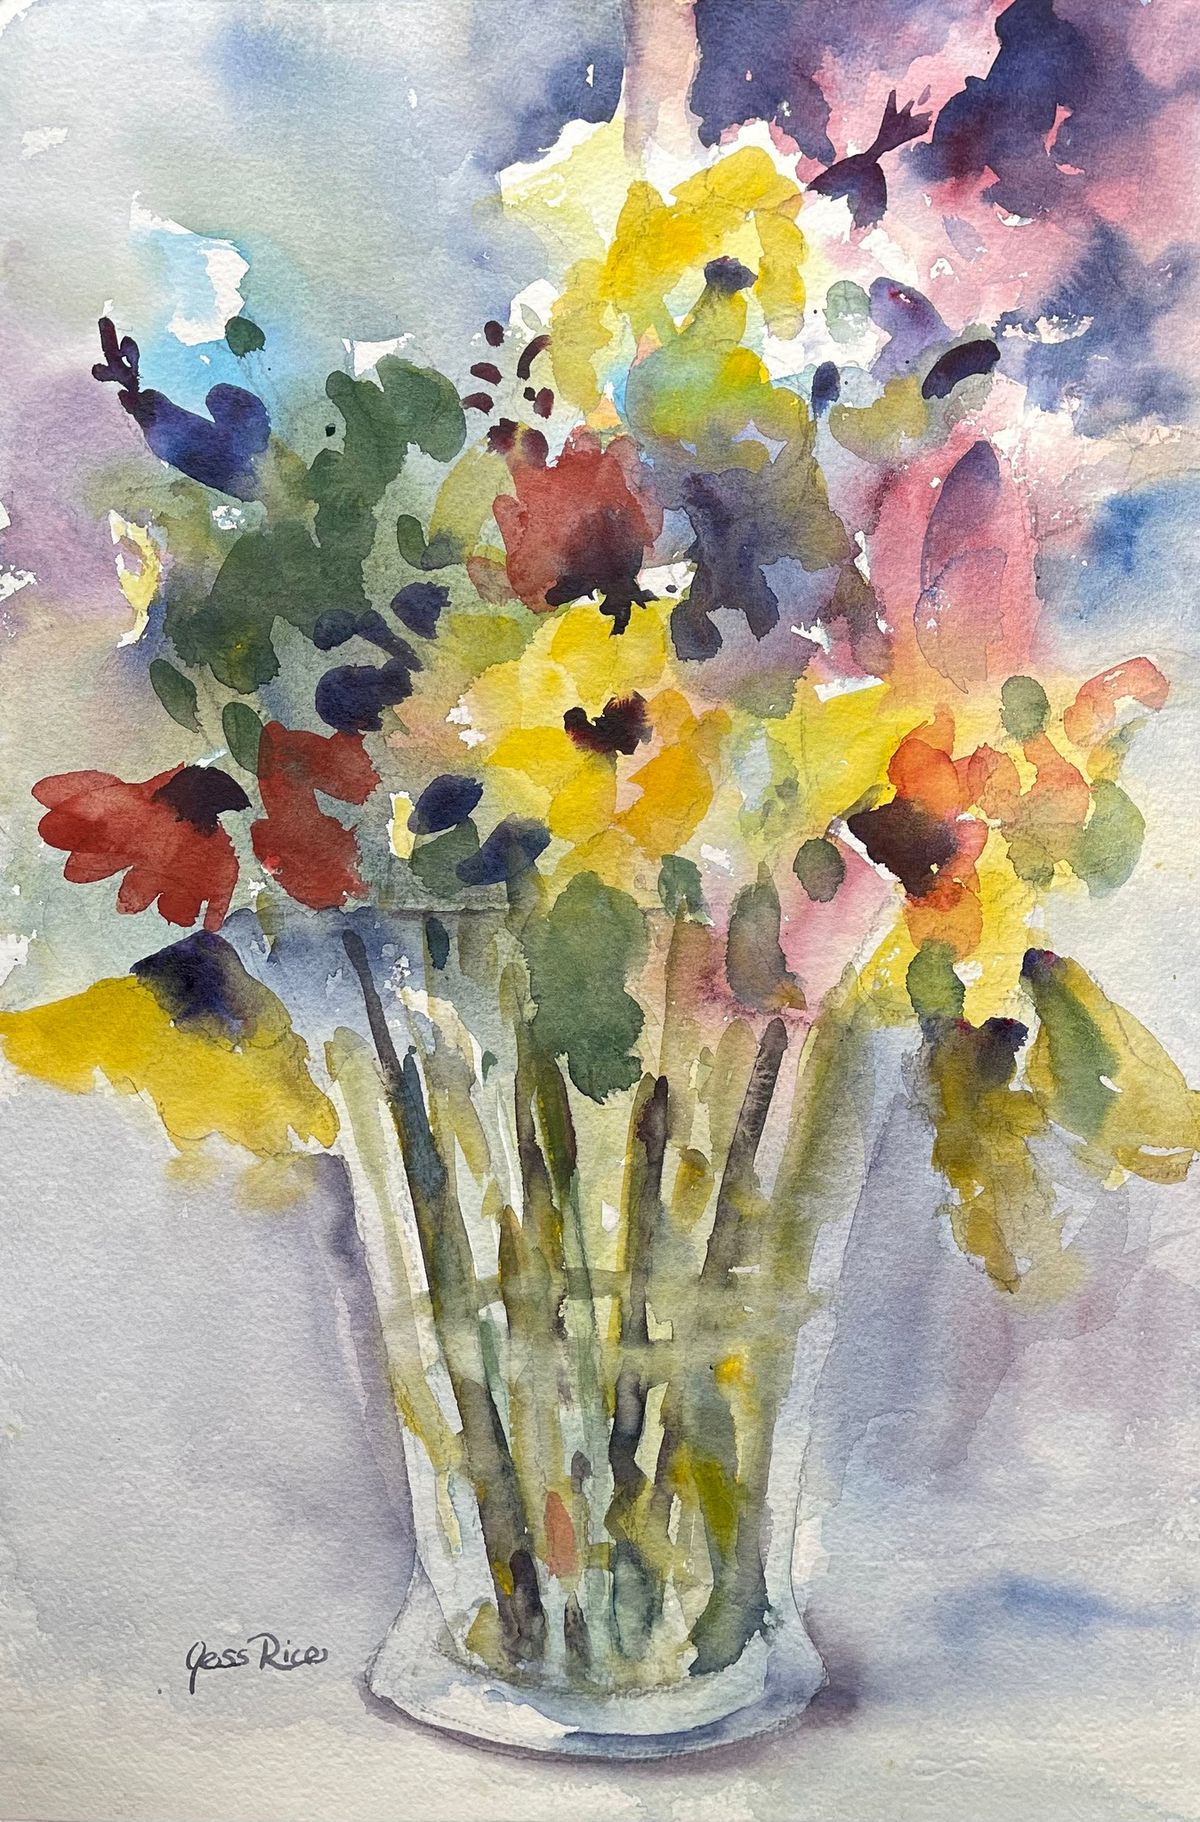 Ready to explore watercolors? Join my weekend workshop for beginners!